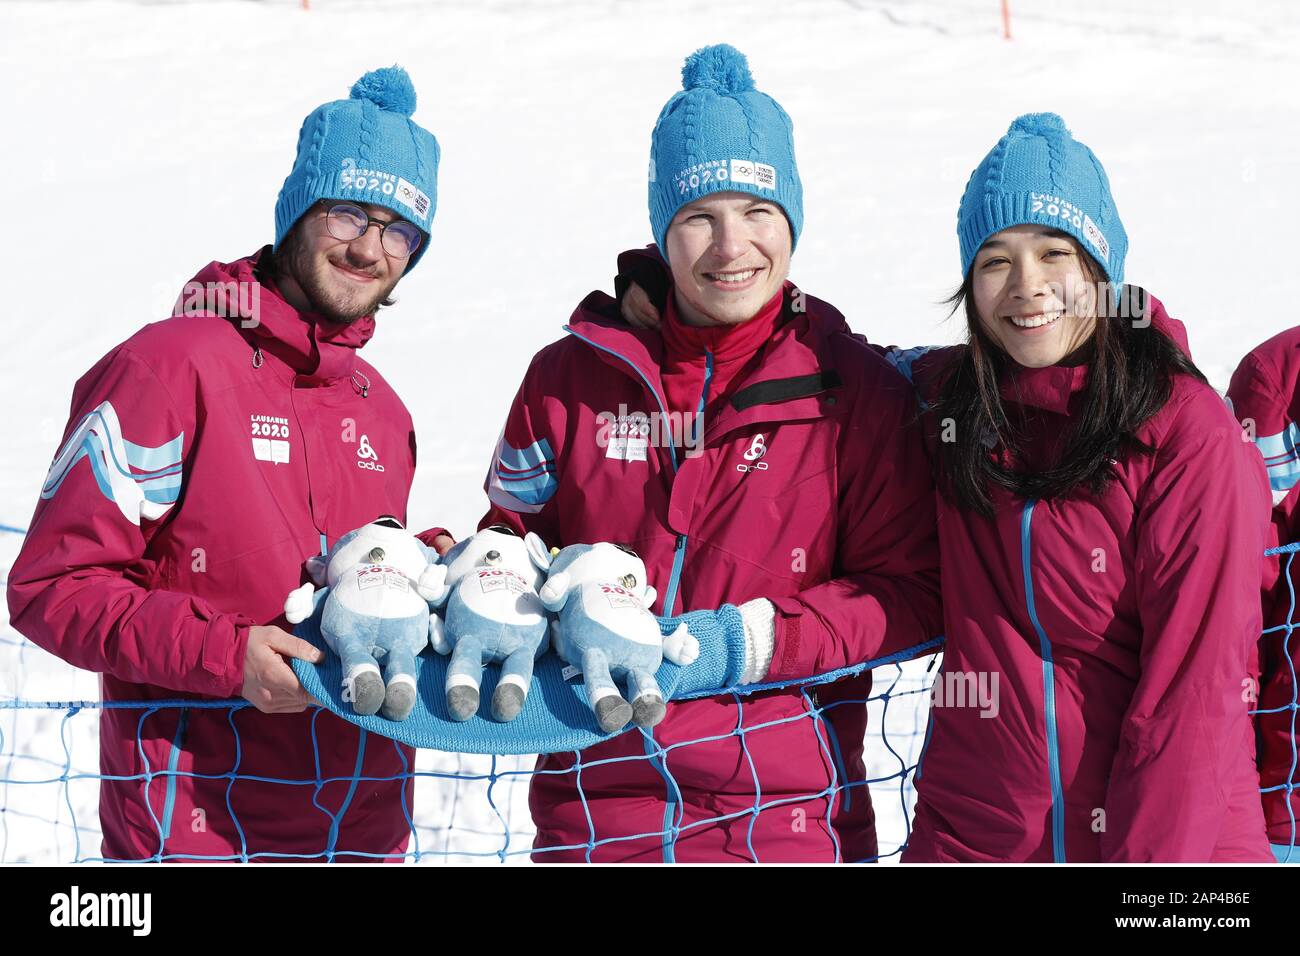 Leysin, Switzerland. 20th Jan, 2020. Mascots during the 3rd Winter Youth Olympic Games Lausanne 2020 Snowboard Women's Halfpipe at Leysin Park & Pipe in Leysin, Switzerland, January 20, 2020. Credit: AFLO SPORT/Alamy Live News Stock Photo